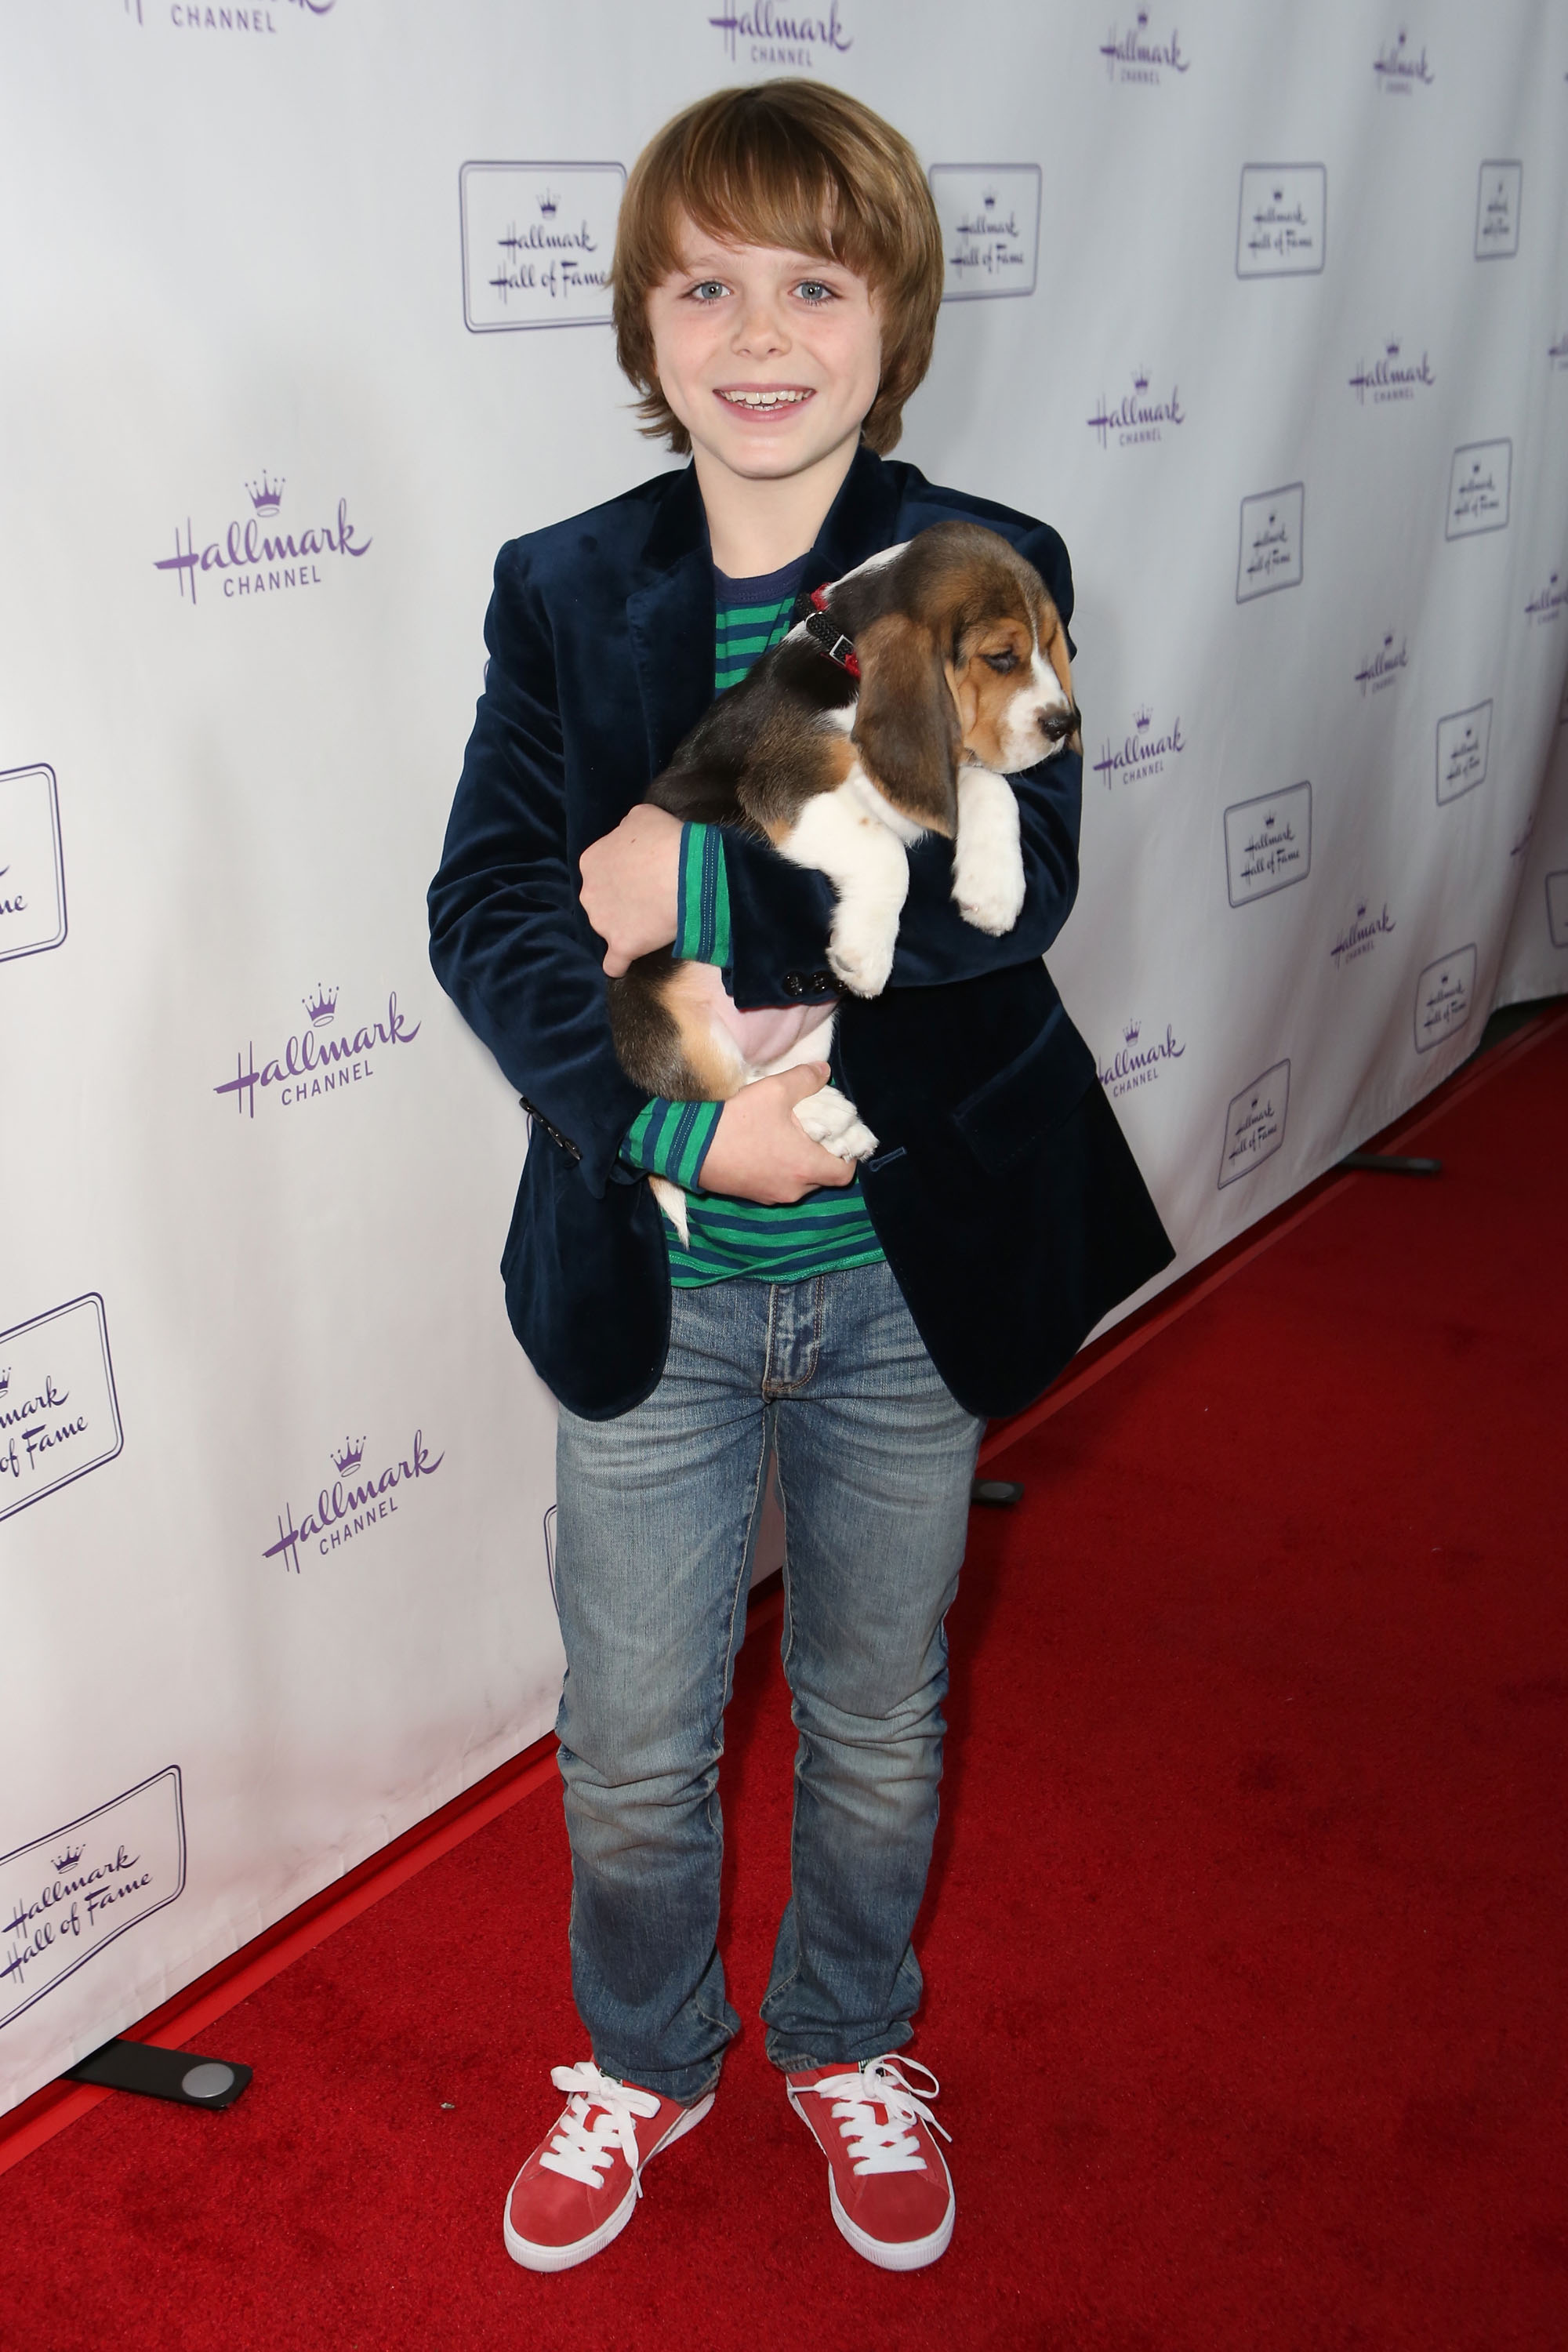 Griffin Kane at the Red Carpet Premiere for One Christmas Eve